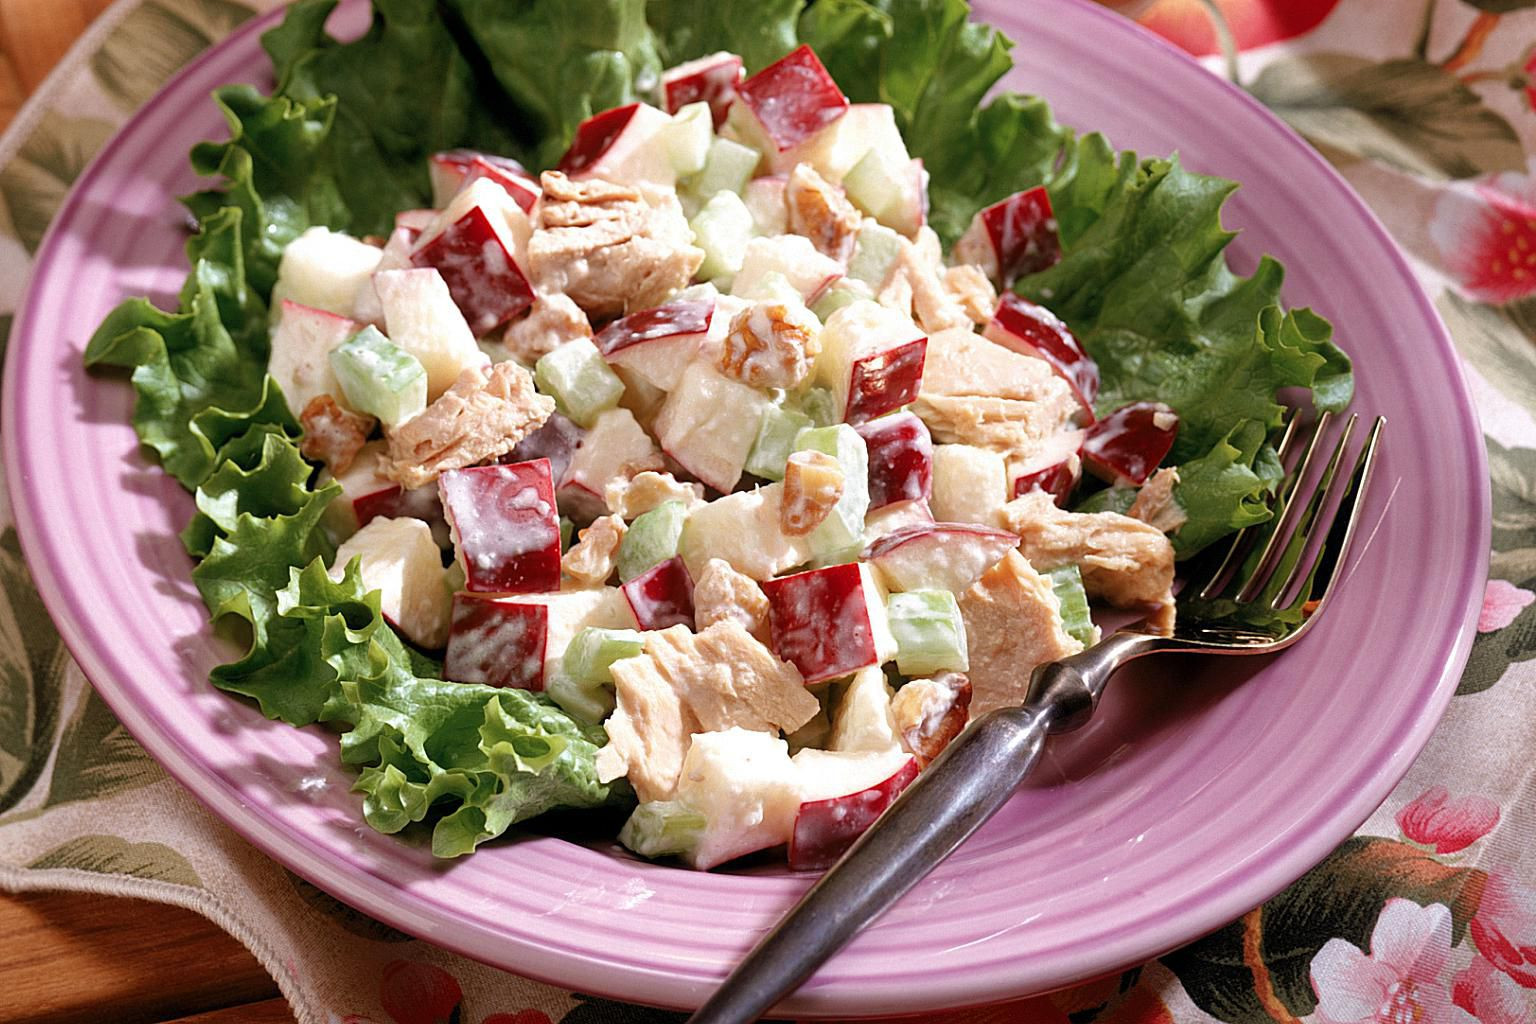 Chicken Salad Recipe With Apples
 Curried Chicken Salad With Diced Apple